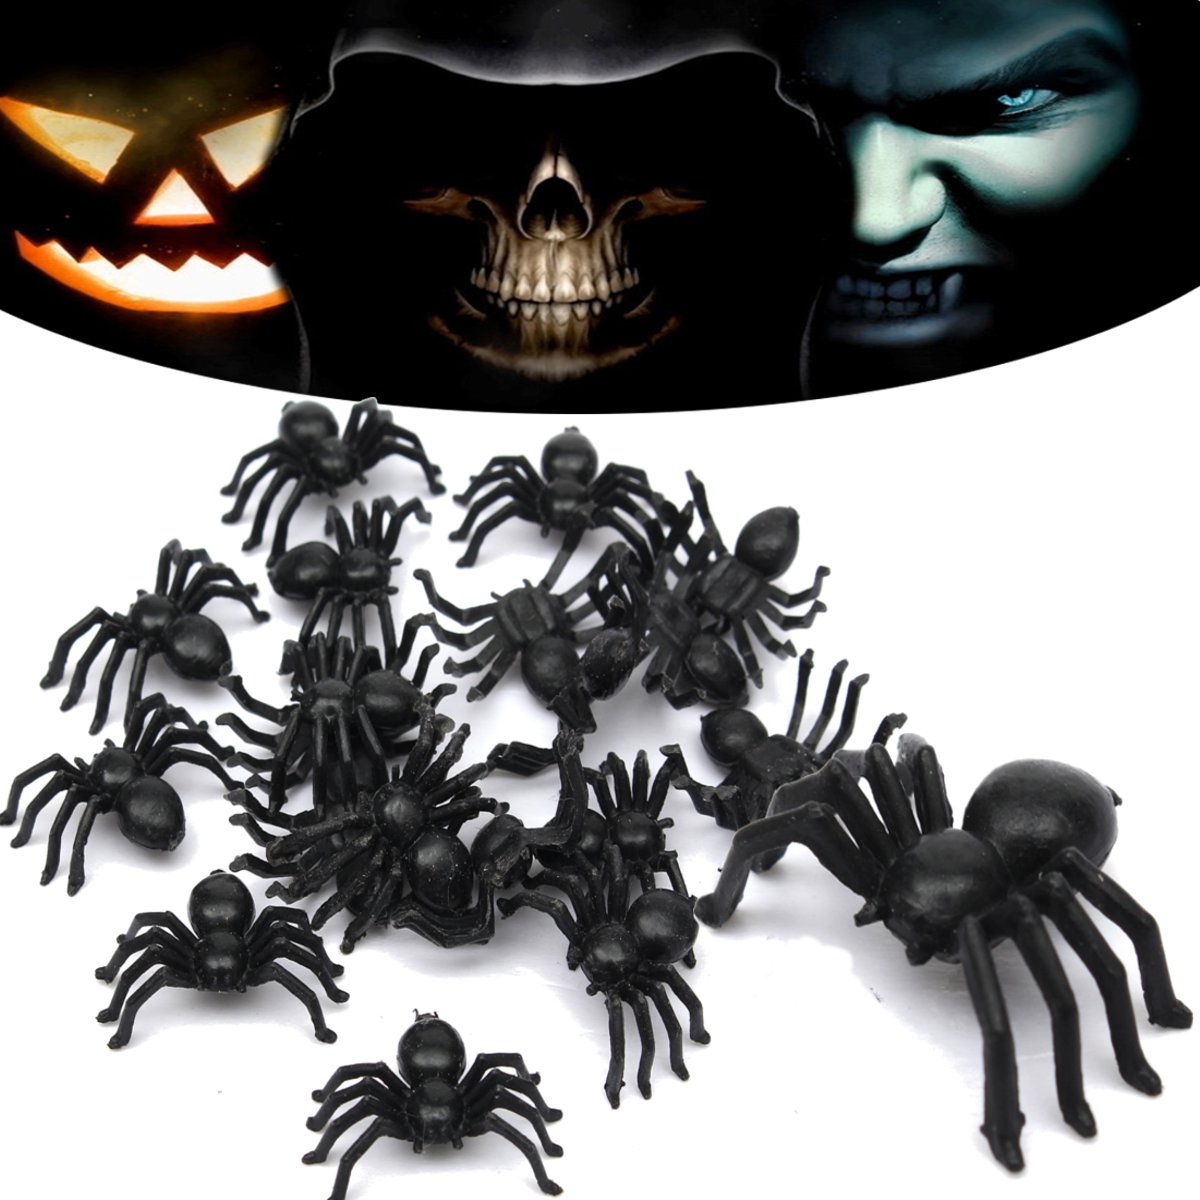 FD621 Halloween Plastic Lovely Spider Joking Toy Decoration Realistic Prop 10PC$ 